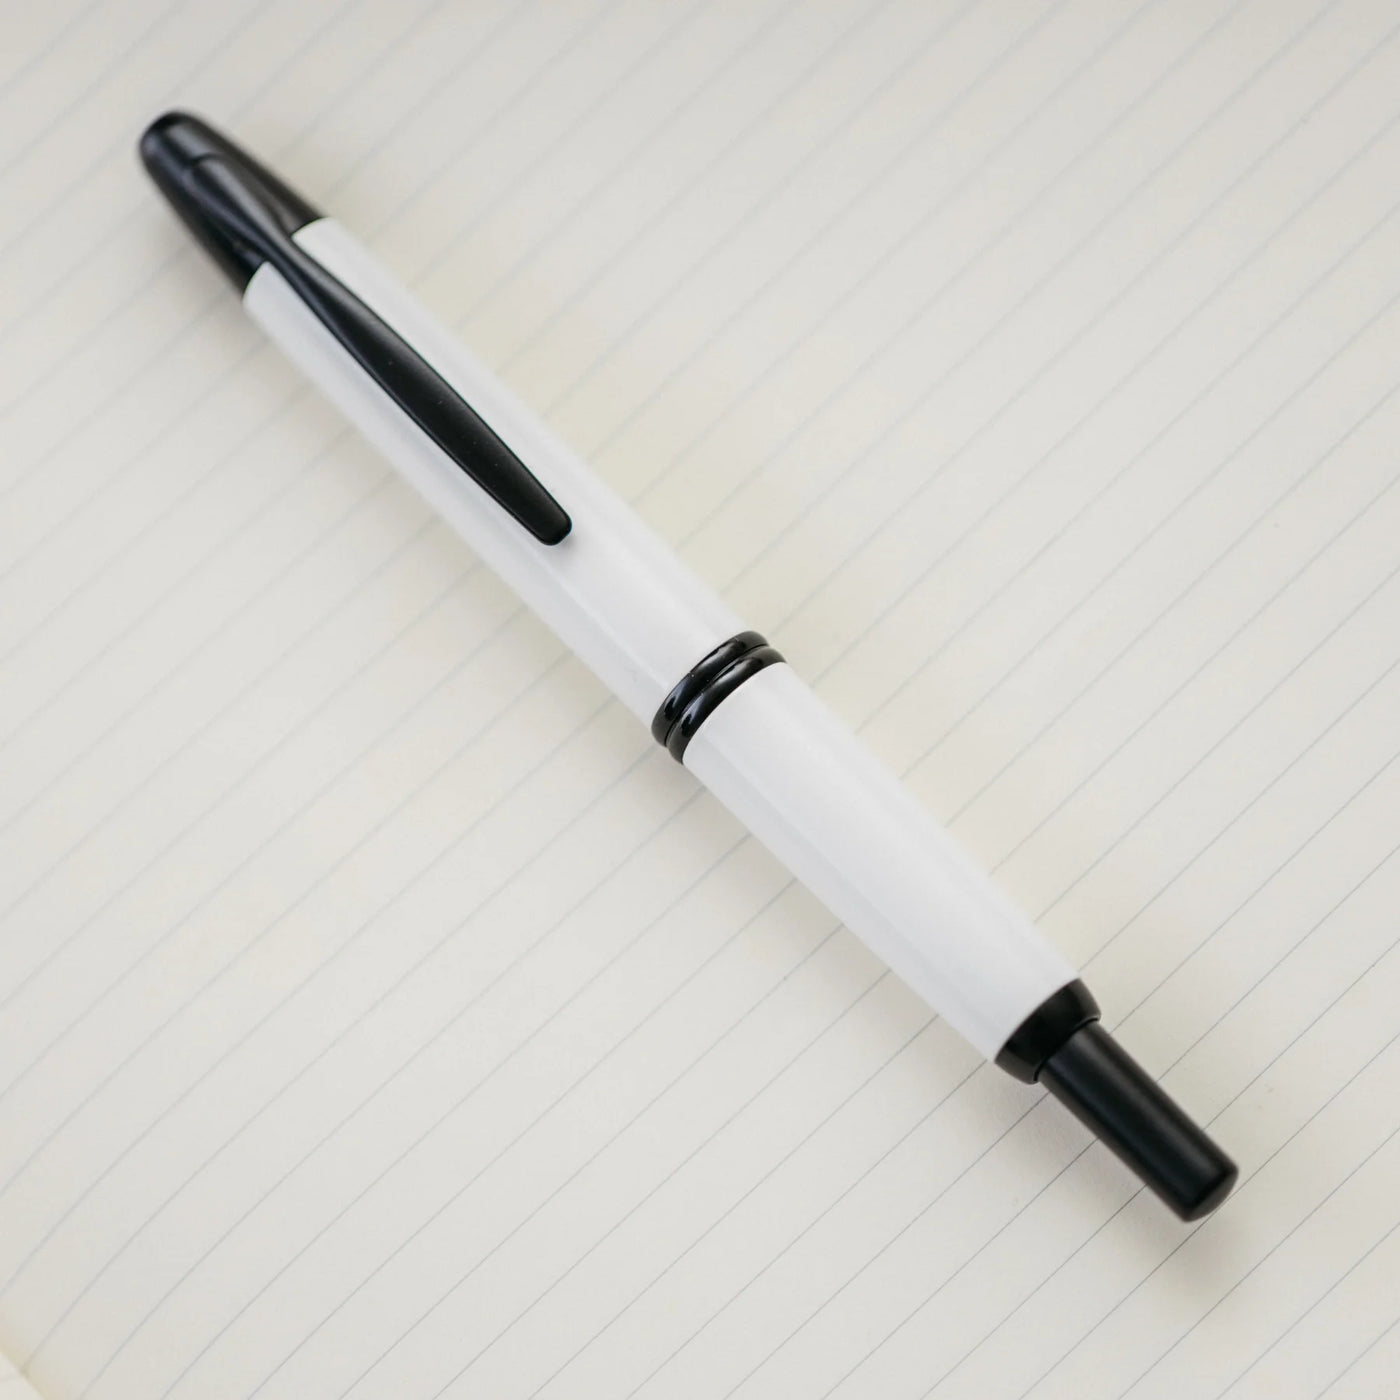 Top 5 Best Pens for Notetaking/studying and Journalling 